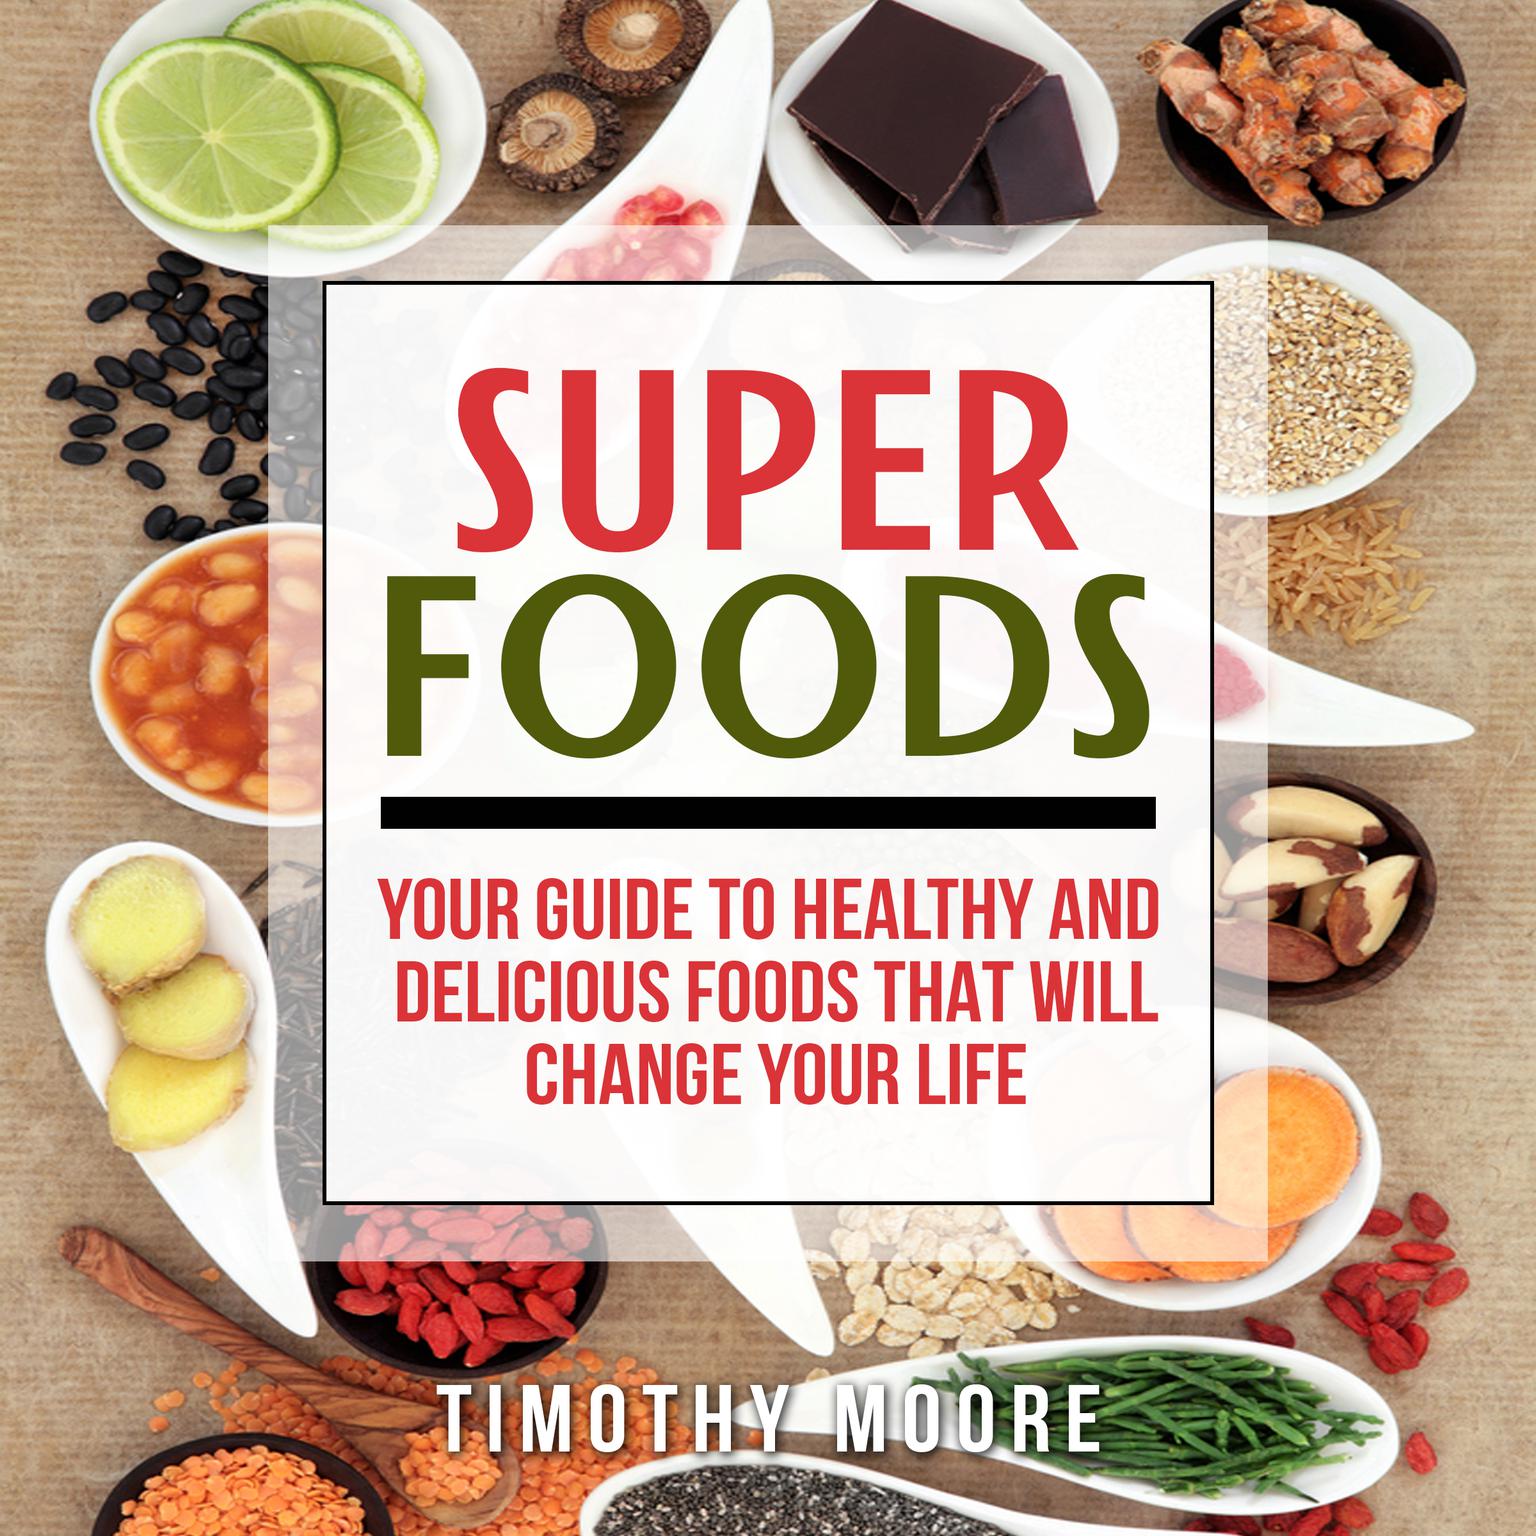 Superfoods: Your Guide to Healthy and Delicious Foods That Will Change Your Life Audiobook, by Timothy Moore